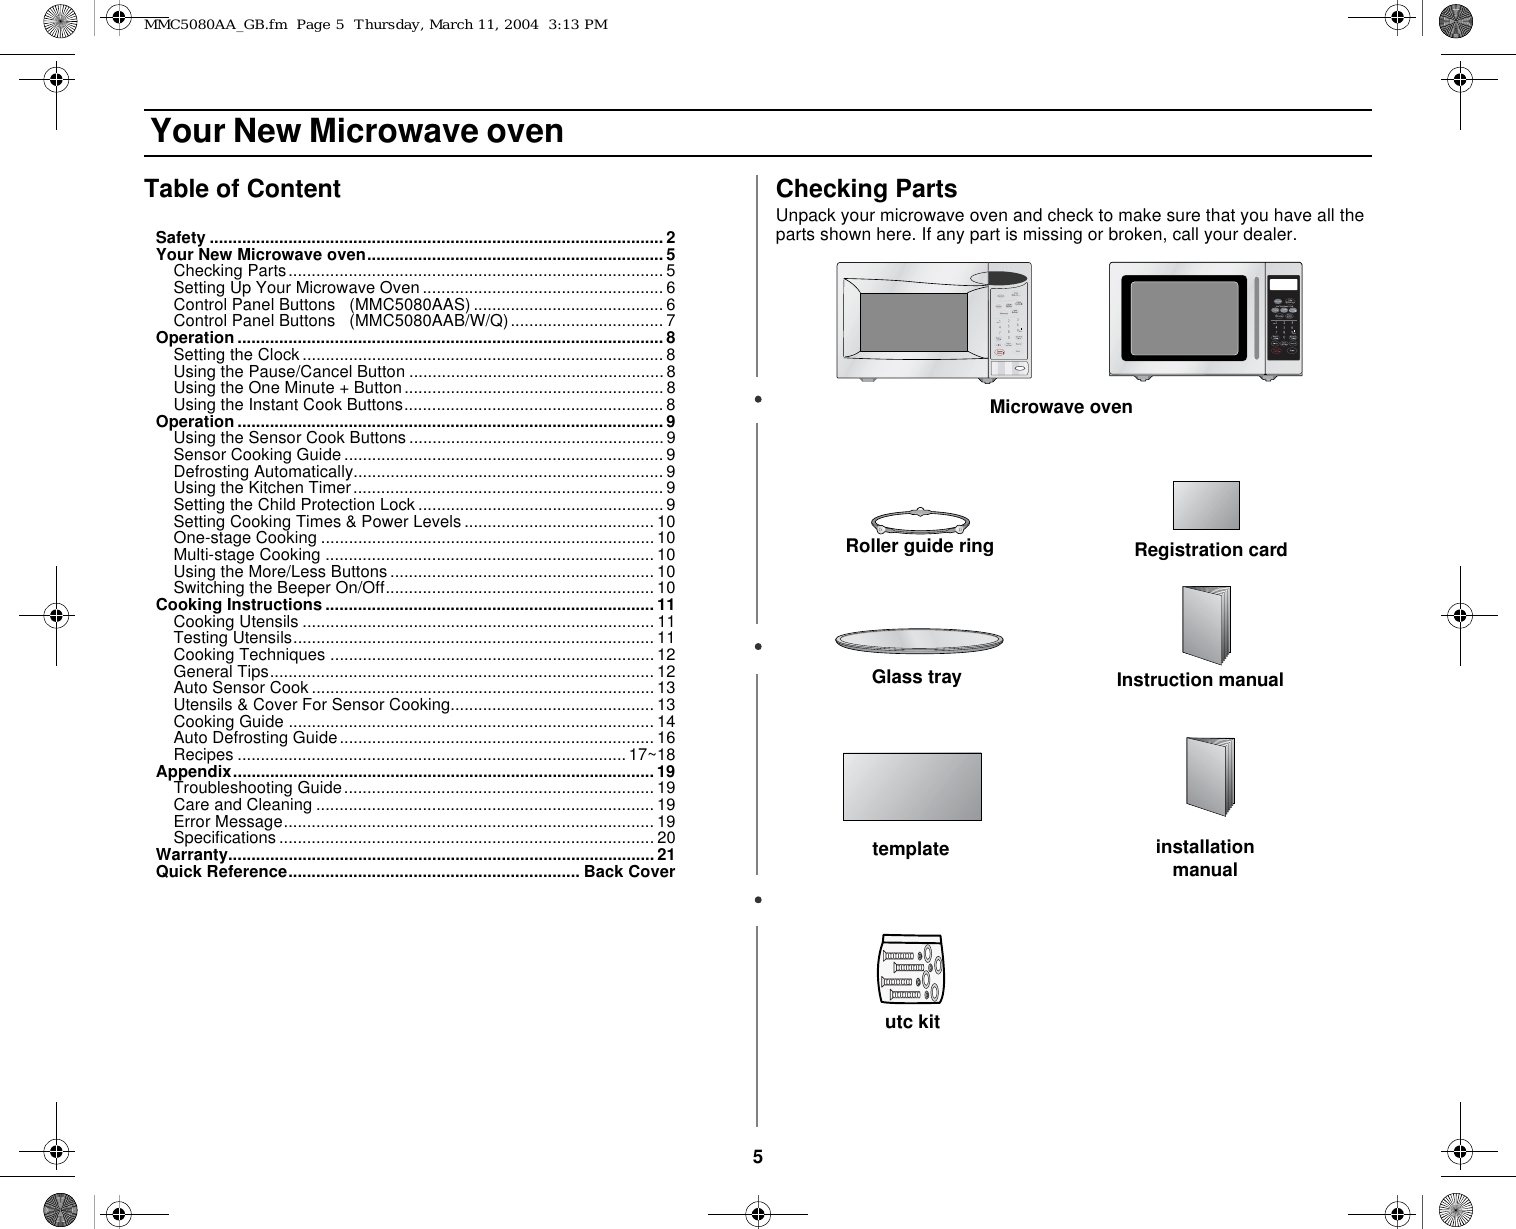 5 Your New Microwave ovenTable of ContentSafety .................................................................................................. 2Your New Microwave oven................................................................ 5Checking Parts................................................................................. 5Setting Up Your Microwave Oven ....................................................6Control Panel Buttons   (MMC5080AAS) ......................................... 6Control Panel Buttons   (MMC5080AAB/W/Q)................................. 7Operation ............................................................................................ 8Setting the Clock.............................................................................. 8Using the Pause/Cancel Button .......................................................8Using the One Minute + Button........................................................ 8Using the Instant Cook Buttons........................................................ 8Operation ............................................................................................ 9Using the Sensor Cook Buttons .......................................................9Sensor Cooking Guide..................................................................... 9Defrosting Automatically................................................................... 9Using the Kitchen Timer................................................................... 9Setting the Child Protection Lock.....................................................9Setting Cooking Times &amp; Power Levels ......................................... 10One-stage Cooking ........................................................................10Multi-stage Cooking ....................................................................... 10Using the More/Less Buttons......................................................... 10Switching the Beeper On/Off..........................................................10Cooking Instructions.......................................................................11Cooking Utensils ............................................................................11Testing Utensils..............................................................................11Cooking Techniques ......................................................................12General Tips...................................................................................12Auto Sensor Cook ..........................................................................13Utensils &amp; Cover For Sensor Cooking............................................ 13Cooking Guide ............................................................................... 14Auto Defrosting Guide.................................................................... 16Recipes ....................................................................................17~18Appendix...........................................................................................19Troubleshooting Guide................................................................... 19Care and Cleaning .........................................................................19Error Message................................................................................19Specifications ................................................................................. 20Warranty............................................................................................ 21Quick Reference............................................................... Back CoverChecking PartsUnpack your microwave oven and check to make sure that you have all the parts shown here. If any part is missing or broken, call your dealer.Microwave ovenGlass trayRoller guide ringInstruction manualRegistration cardinstallation manualtemplateutc kitMMC5080AA_GB.fm  Page 5  Thursday, March 11, 2004  3:13 PM